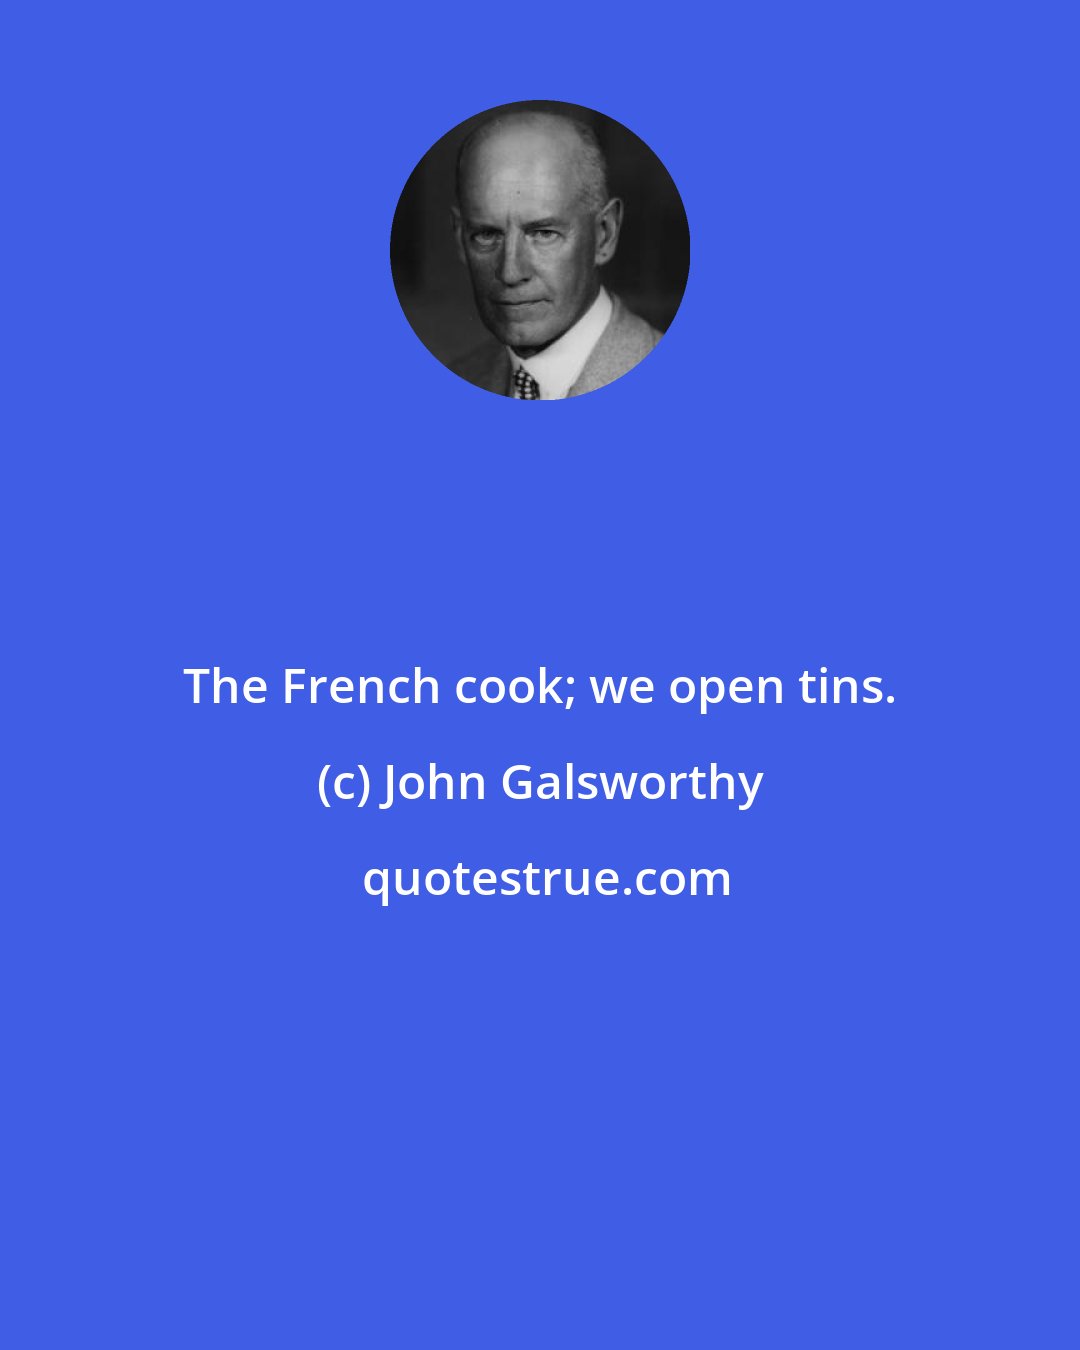 John Galsworthy: The French cook; we open tins.